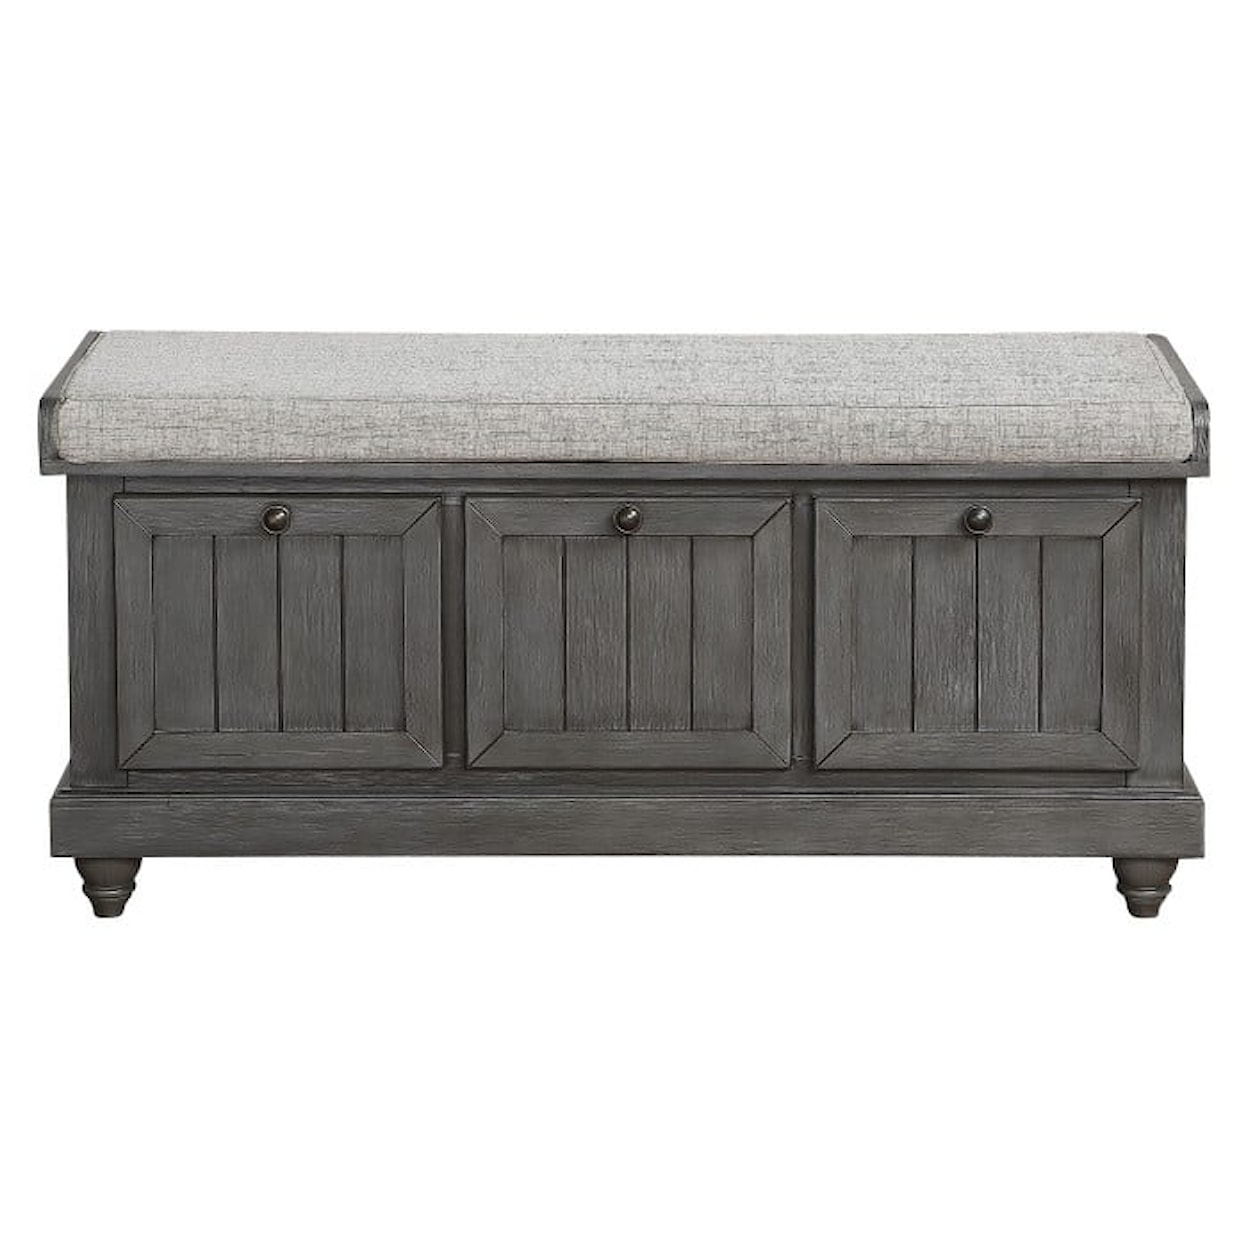 Homelegance Furniture Woodwell Lift Top Storage Bench